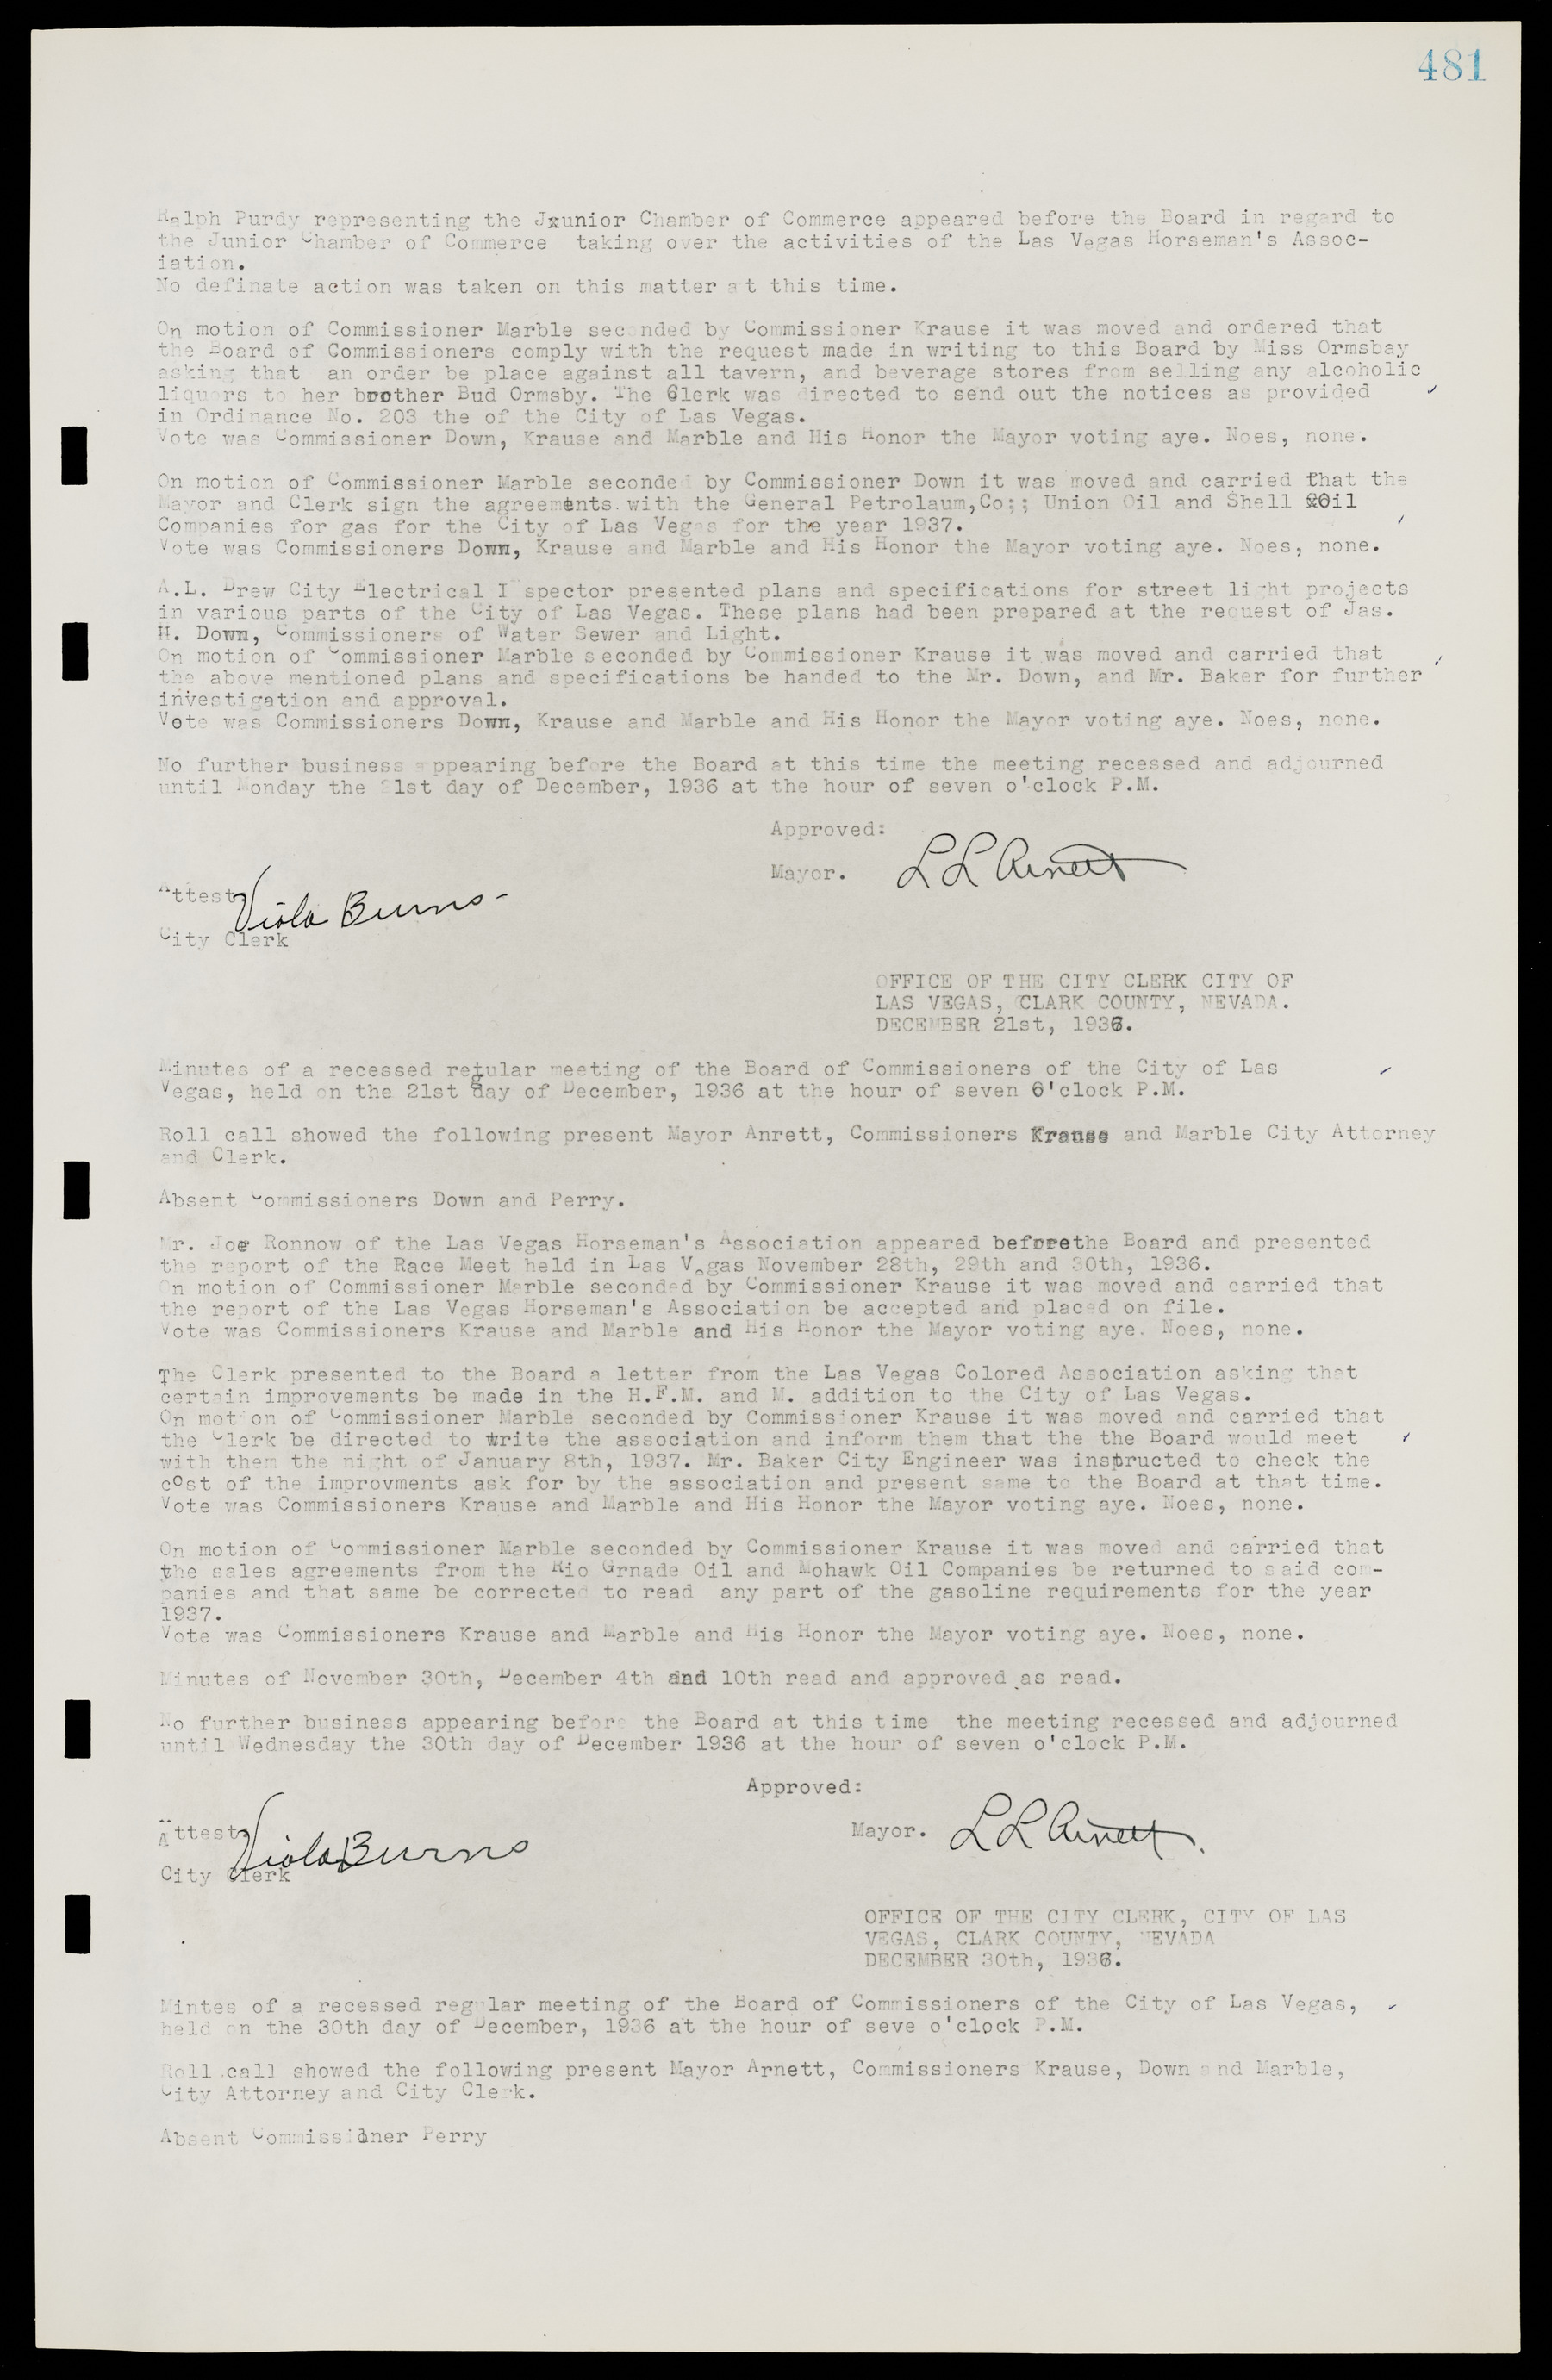 Las Vegas City Commission Minutes, May 14, 1929 to February 11, 1937, lvc000003-488